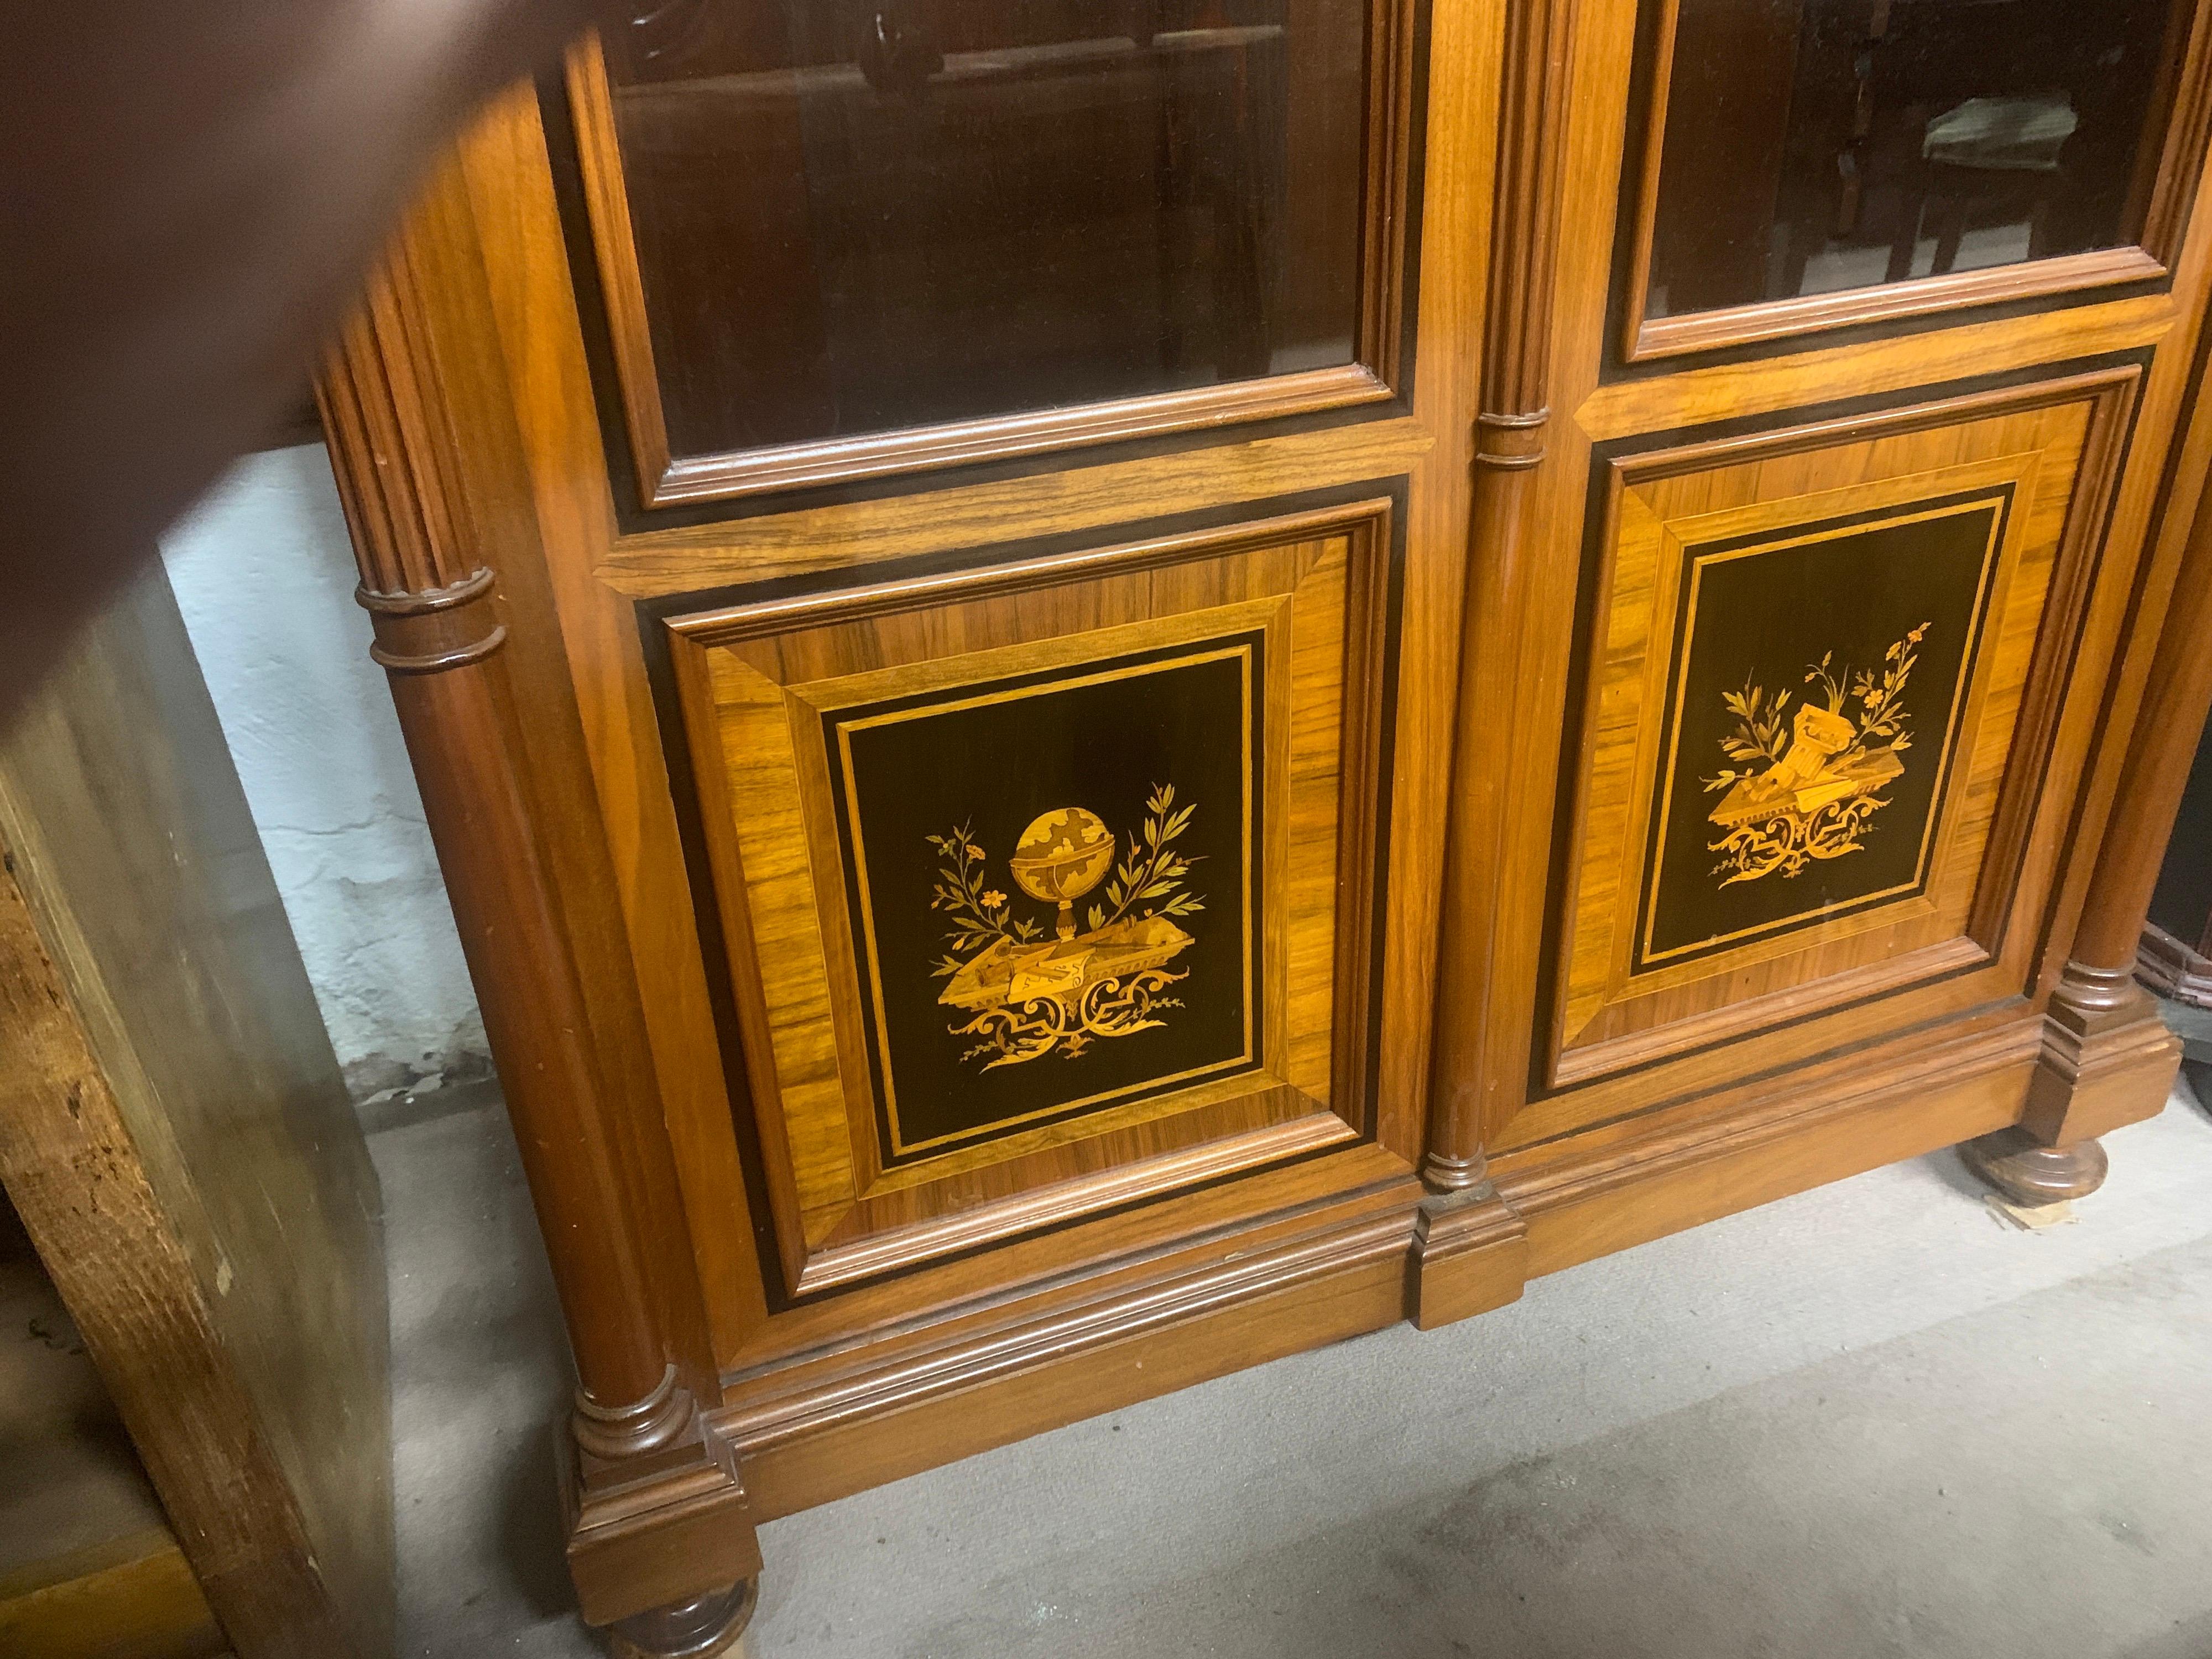 Lovely Biedermeier cabinet, made of walnut wood and inlaid with fruit woods. Architectural furniture and at the same time linear and elegant. This is a fantastic display case!!! Hard to find another similar.